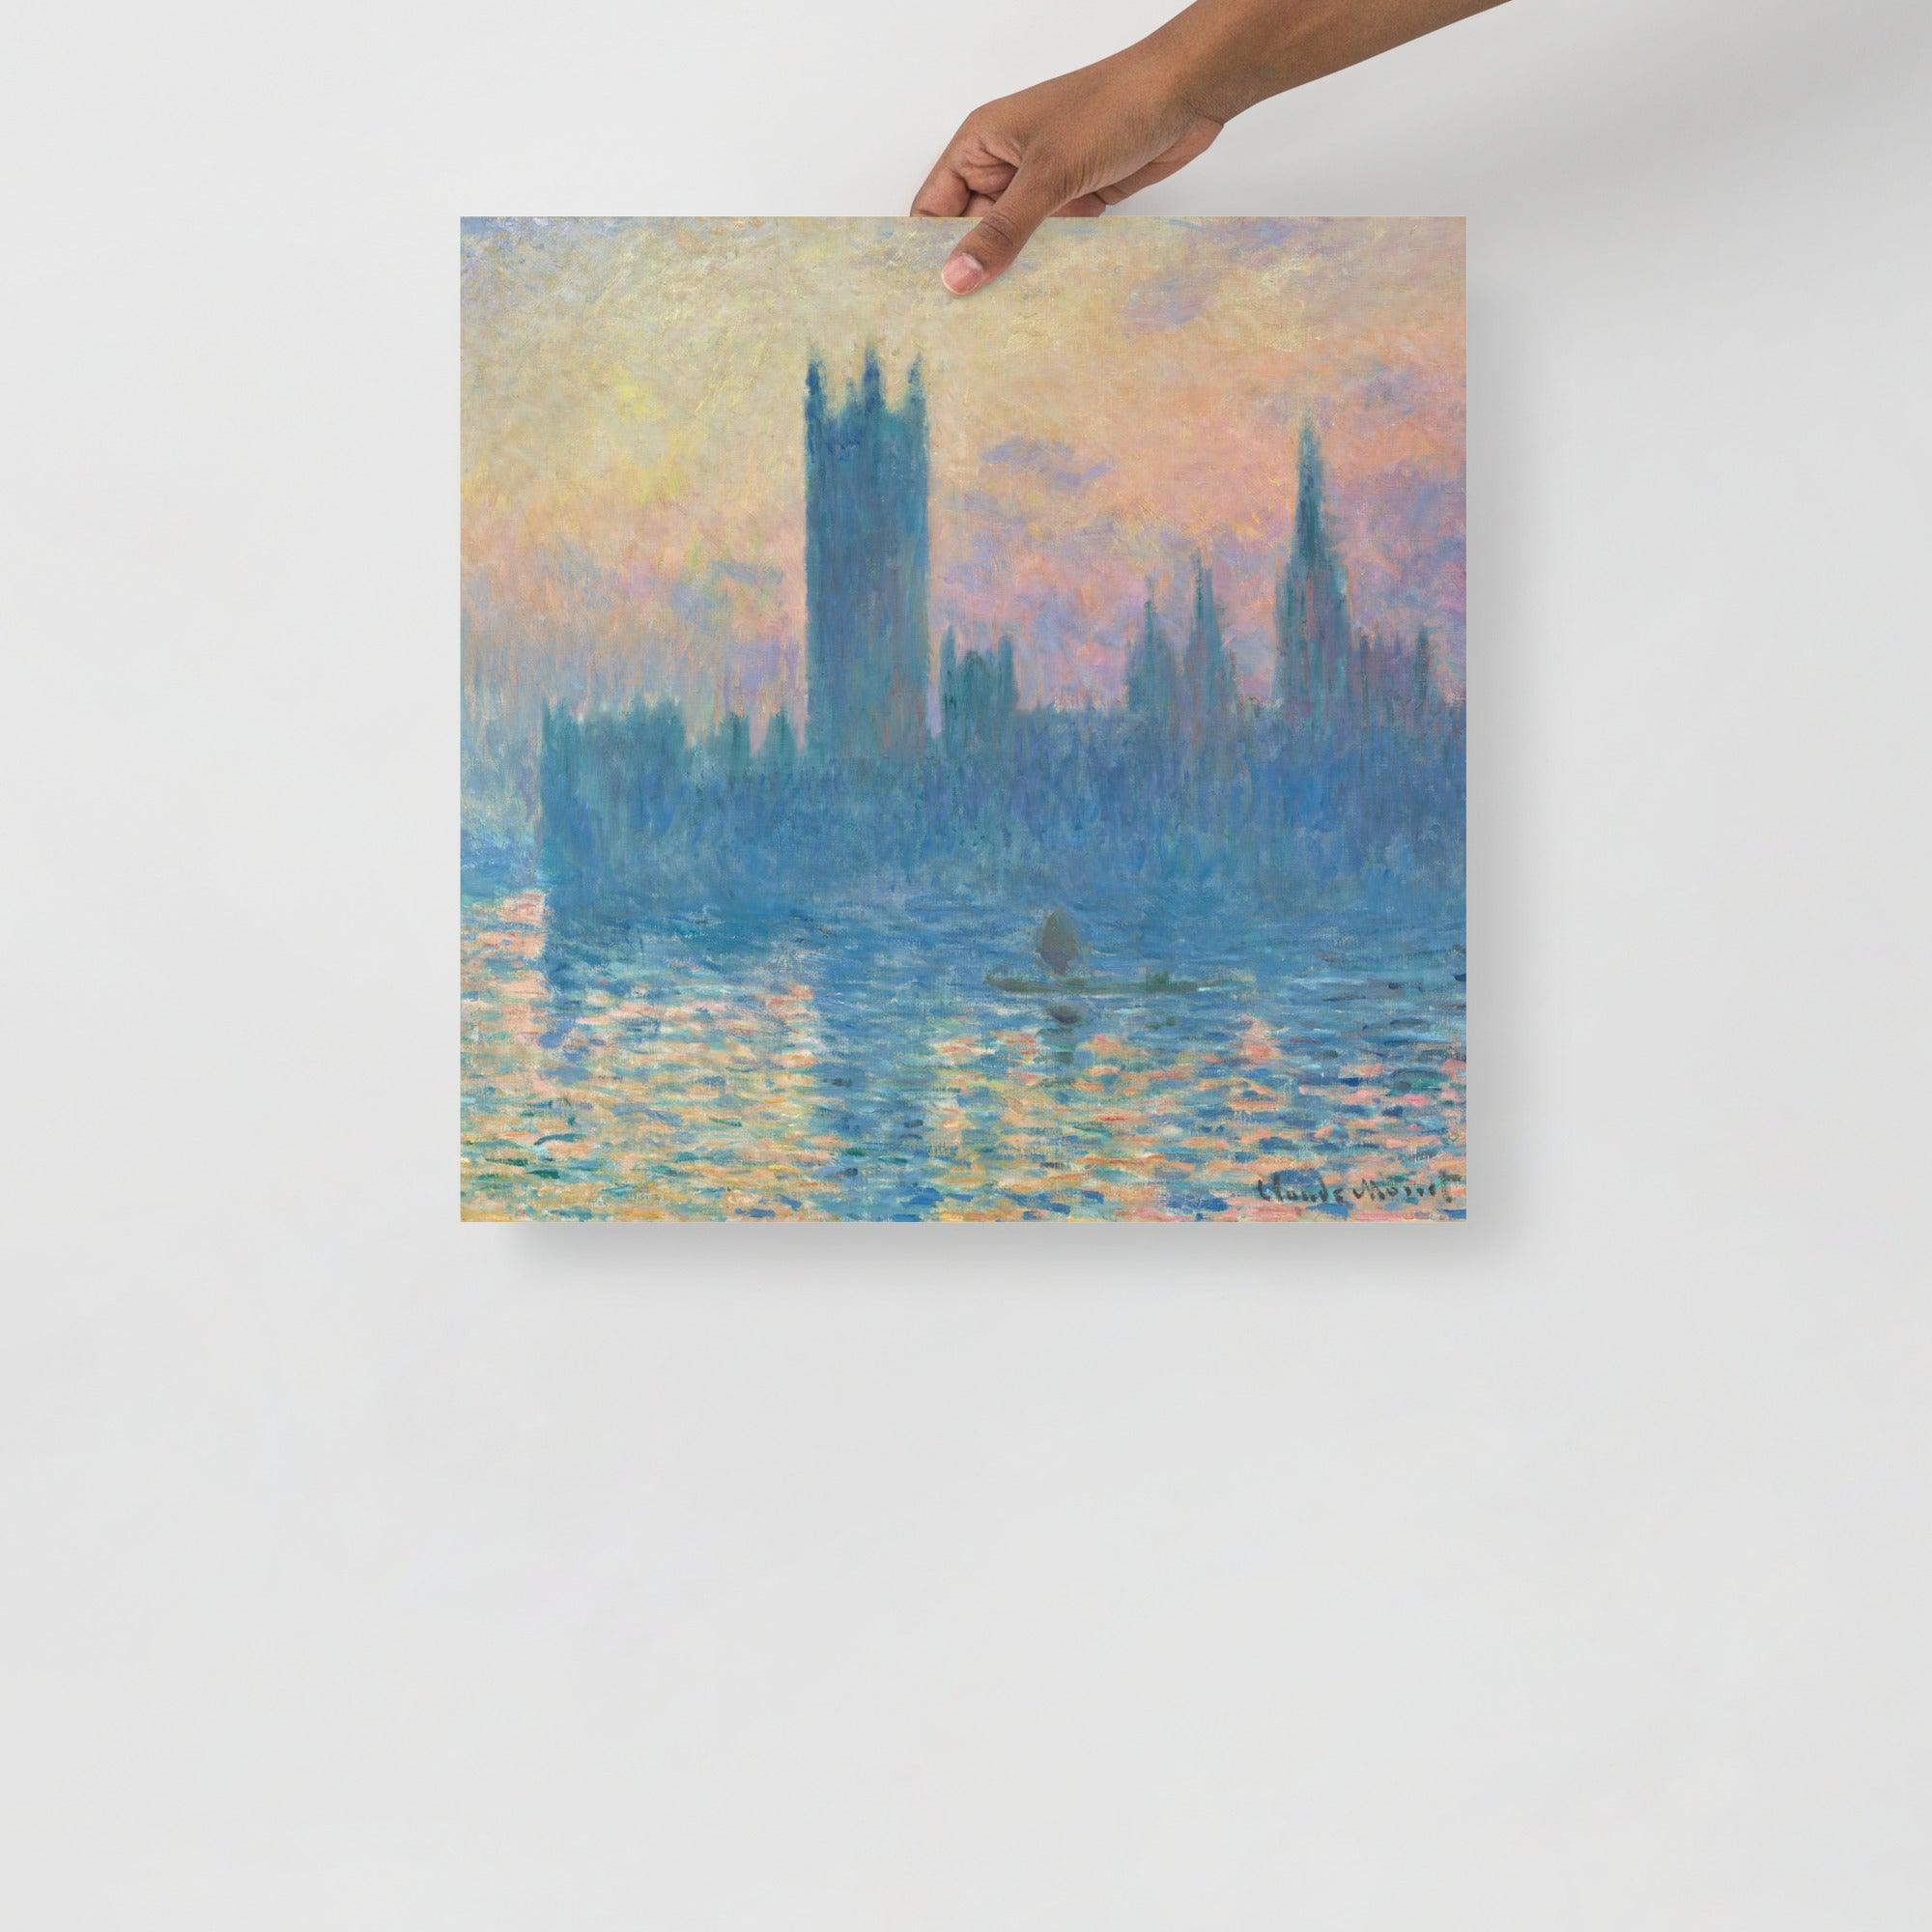 The Houses of Parliament, Sunset by Claude Monet poster on a plain backdrop in size 18x18”.